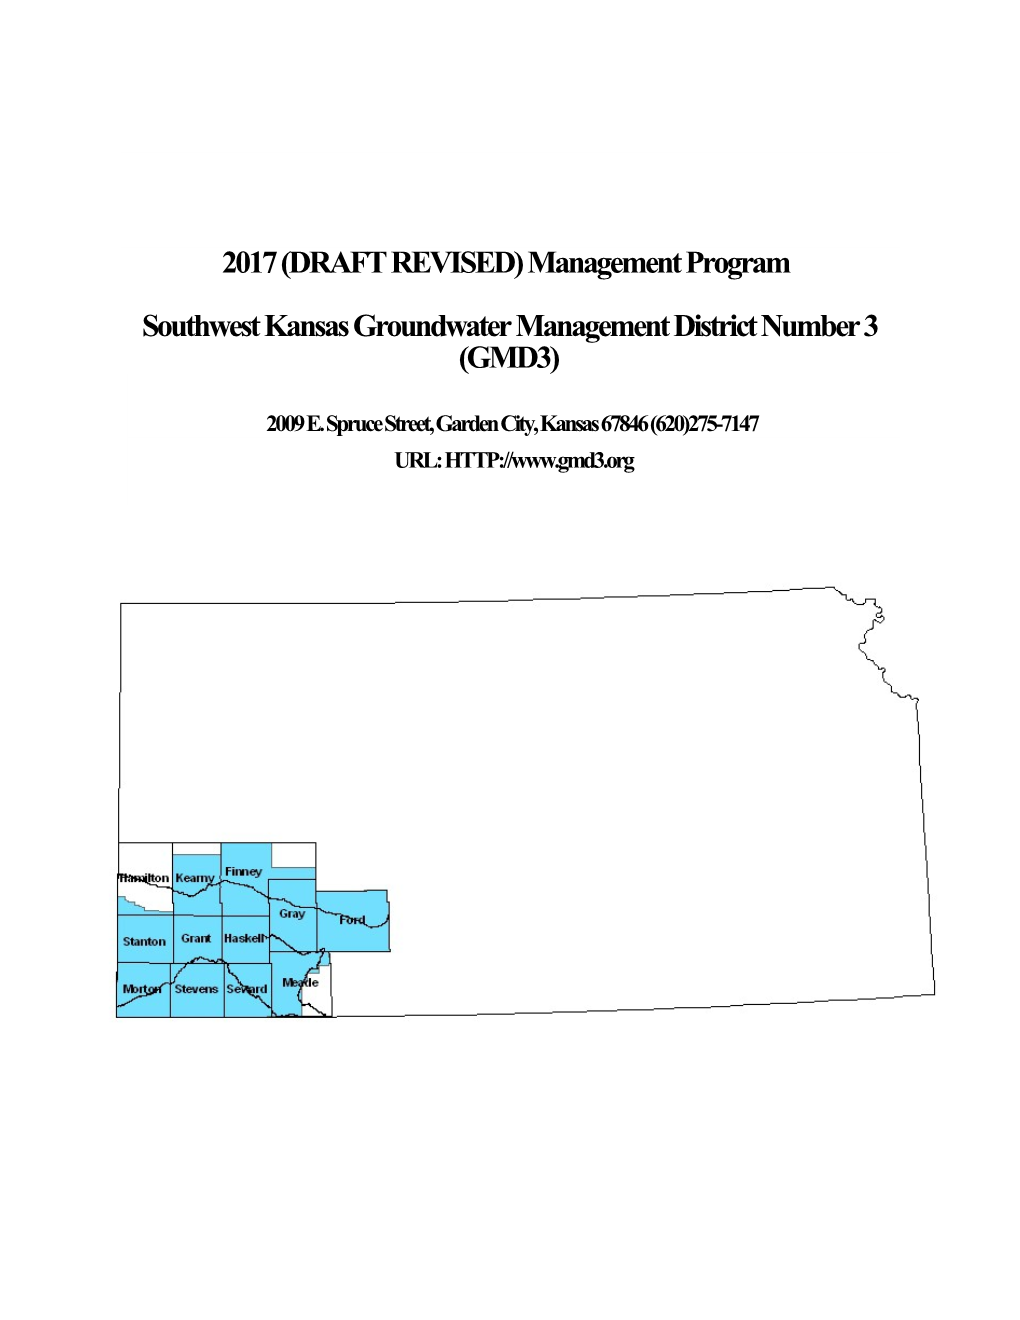 Southwest Kansas Groundwater Management District Number 3 (GMD3)